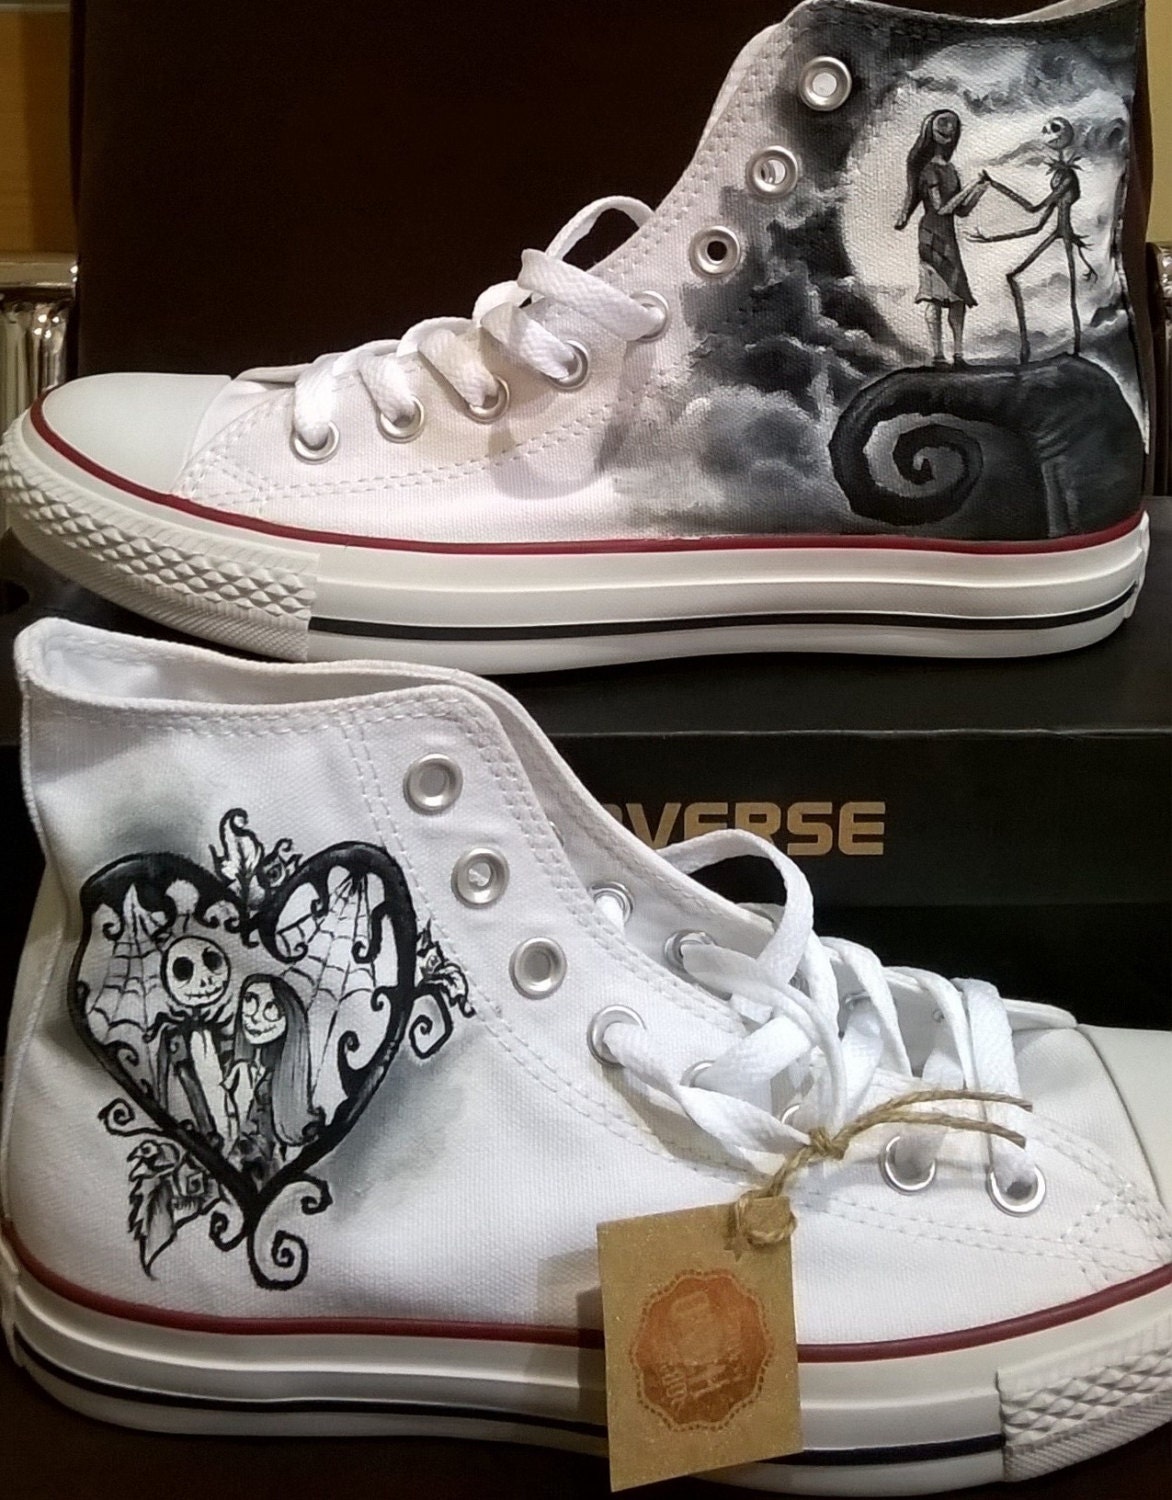 Nightmare before Christmas hand painted Converse shoes